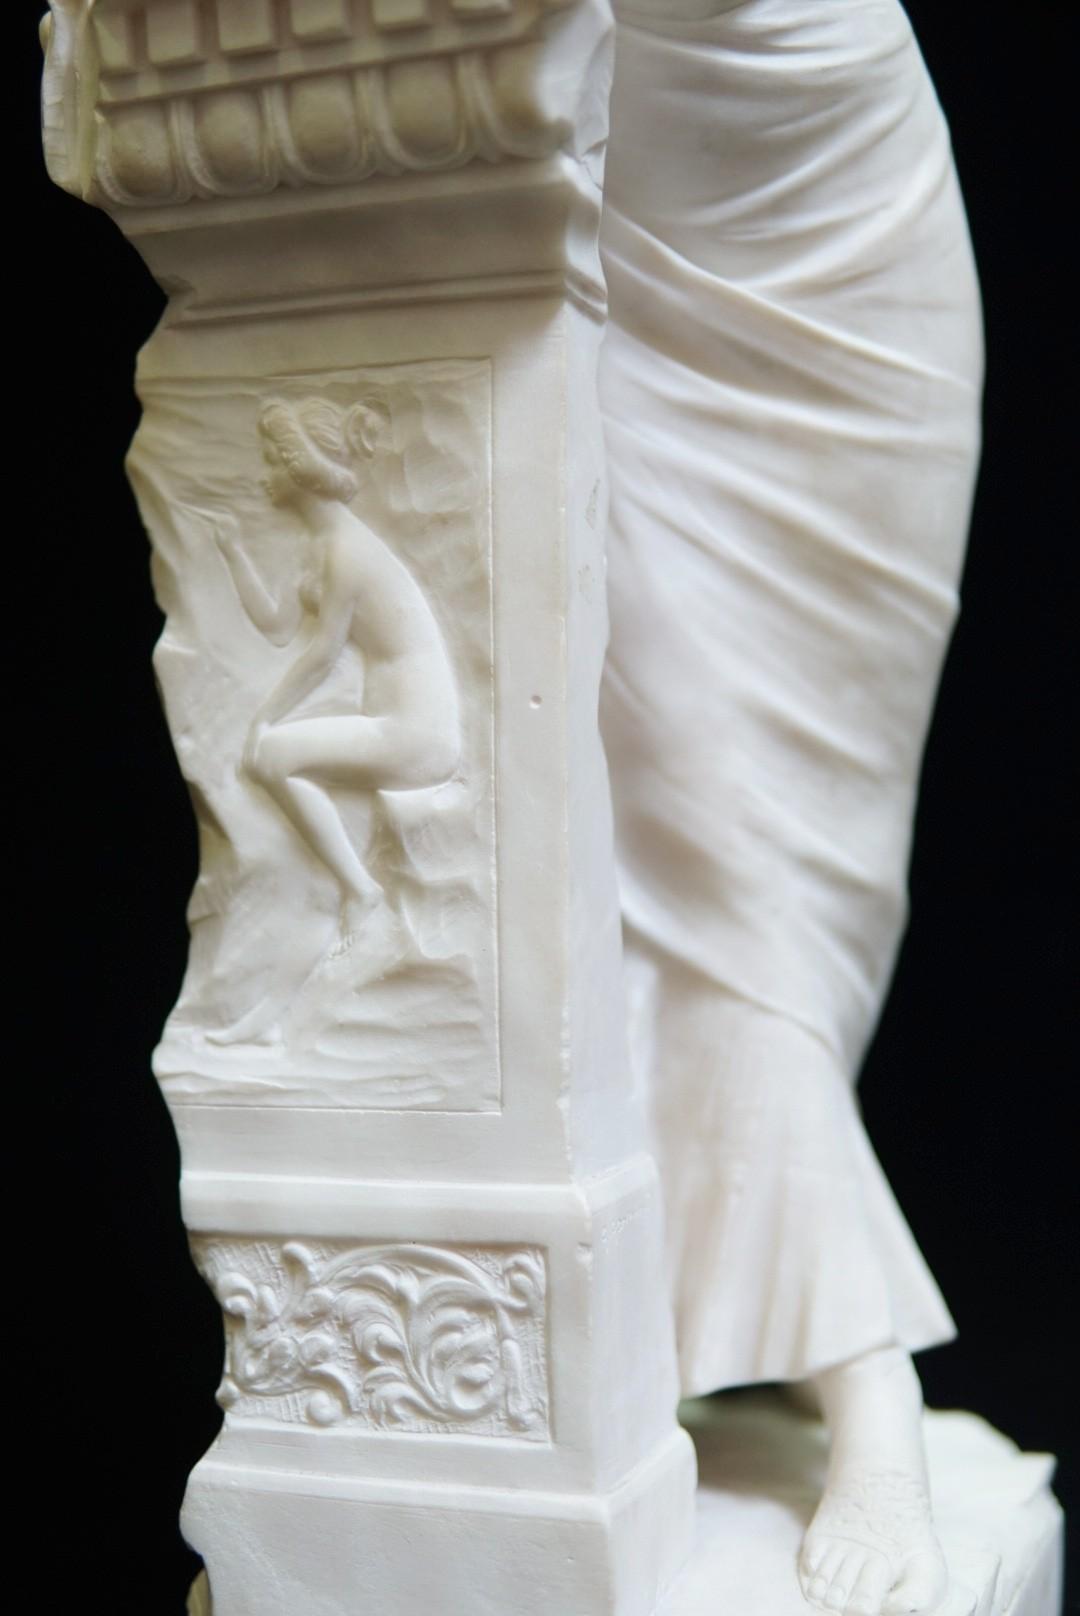 Italian Neoclassical Style Hand-Carved Alabaster Sculpture, 19 Century For Sale 1